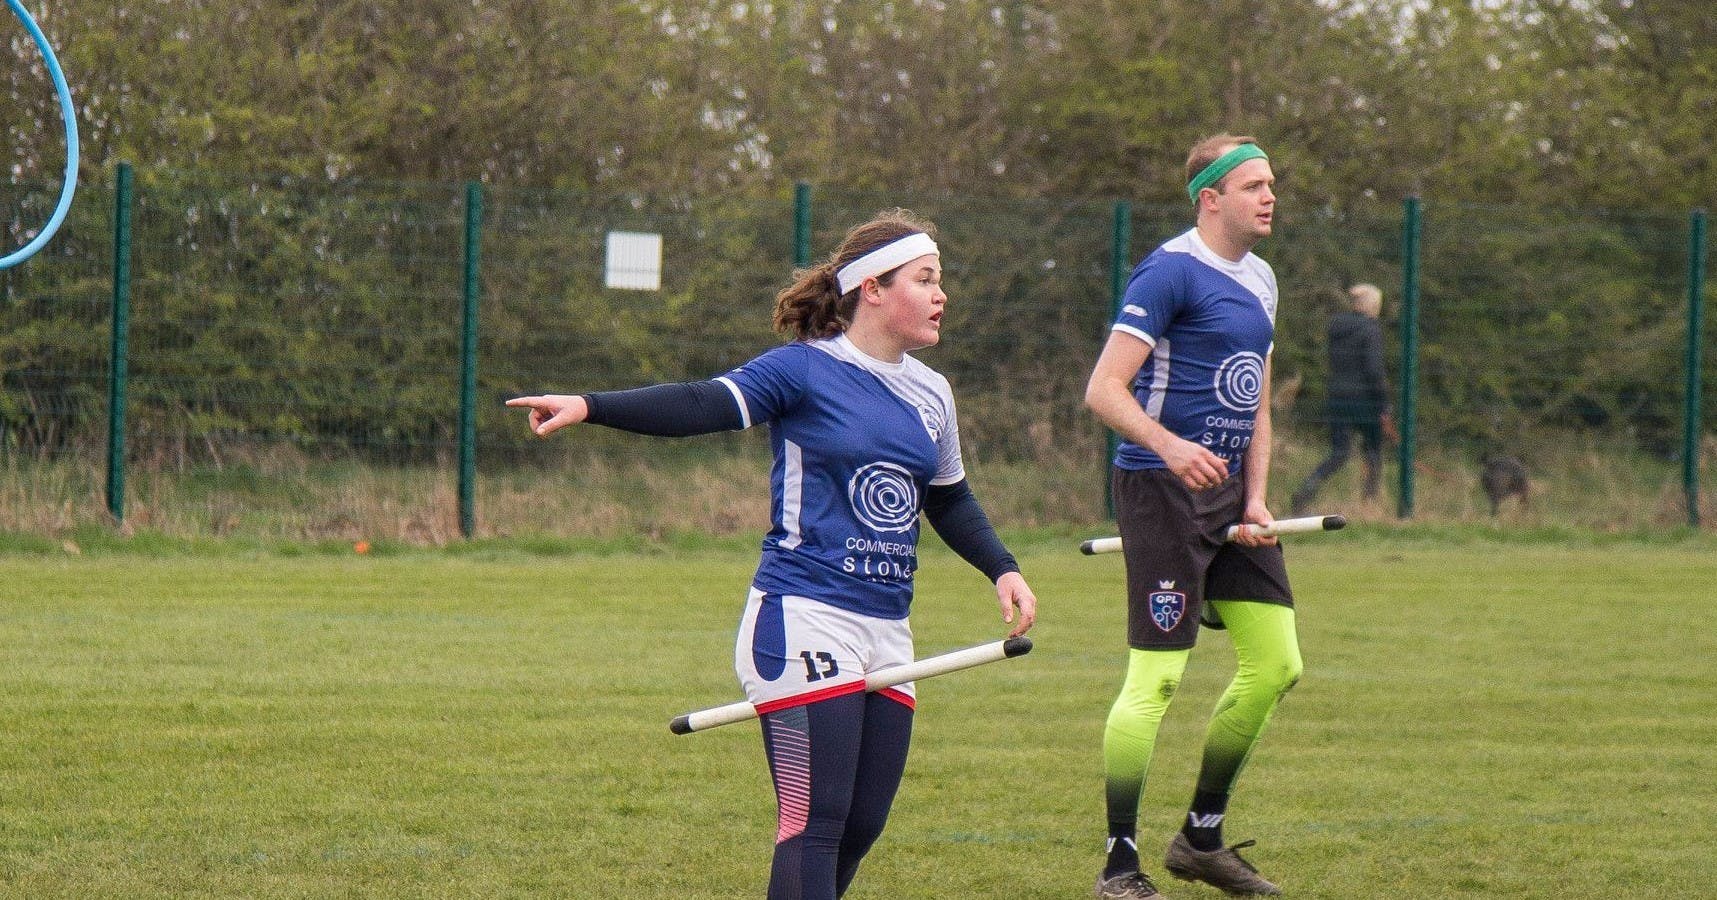 Bex Lowe points to something off-pitch while chasing during a match